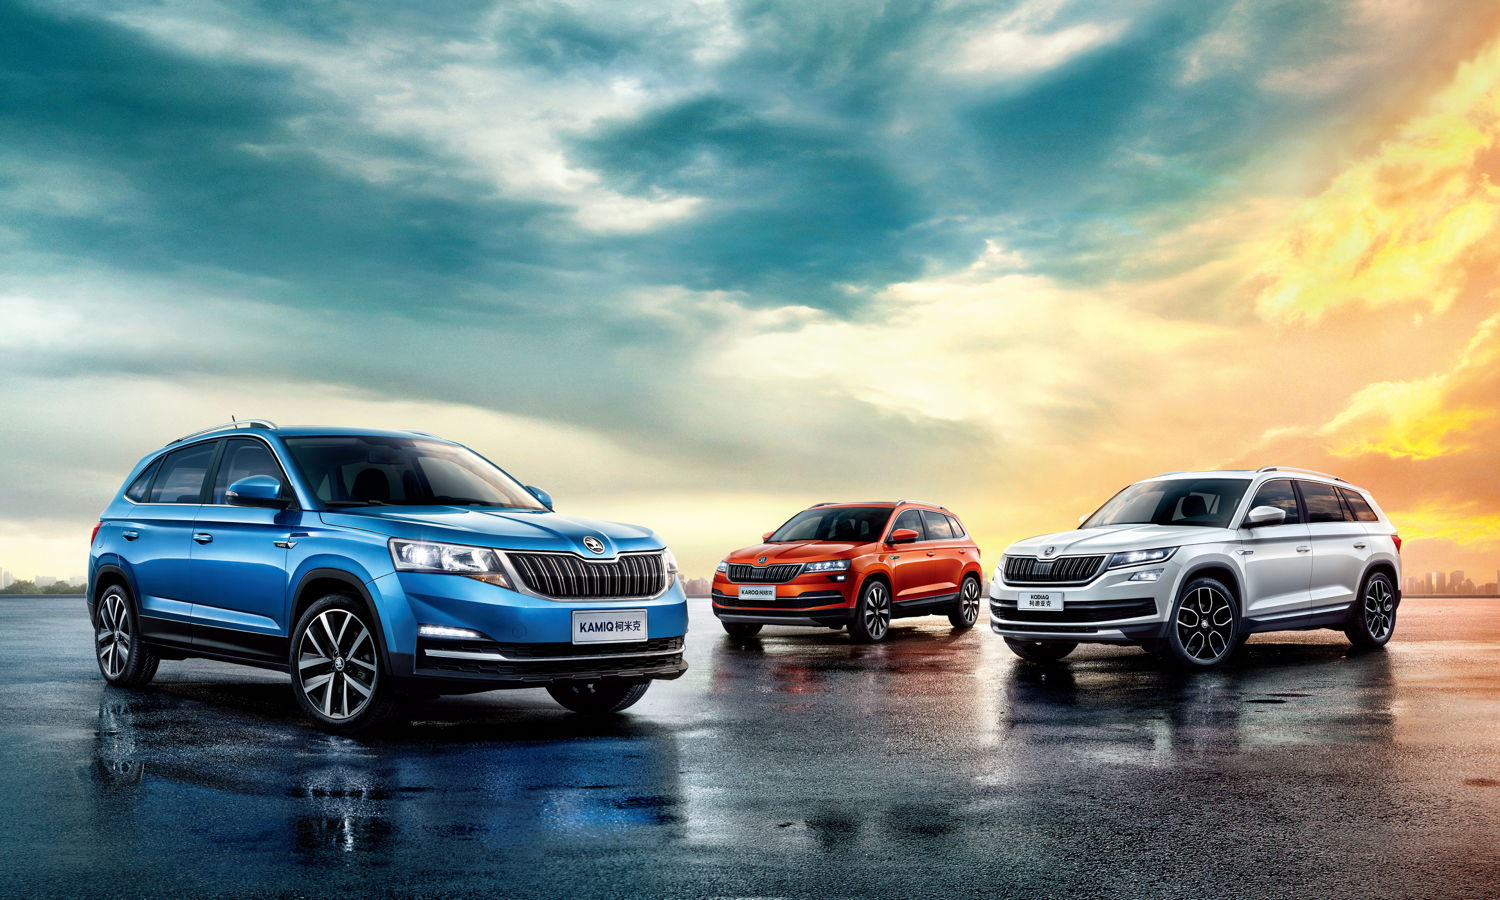 ŠKODA intends to strengthen its favourable market position
in China and double its vehicle sales to 600,000 units per
year by 2020. The brand is taking the next steps in its
model campaign for the Chinese market.